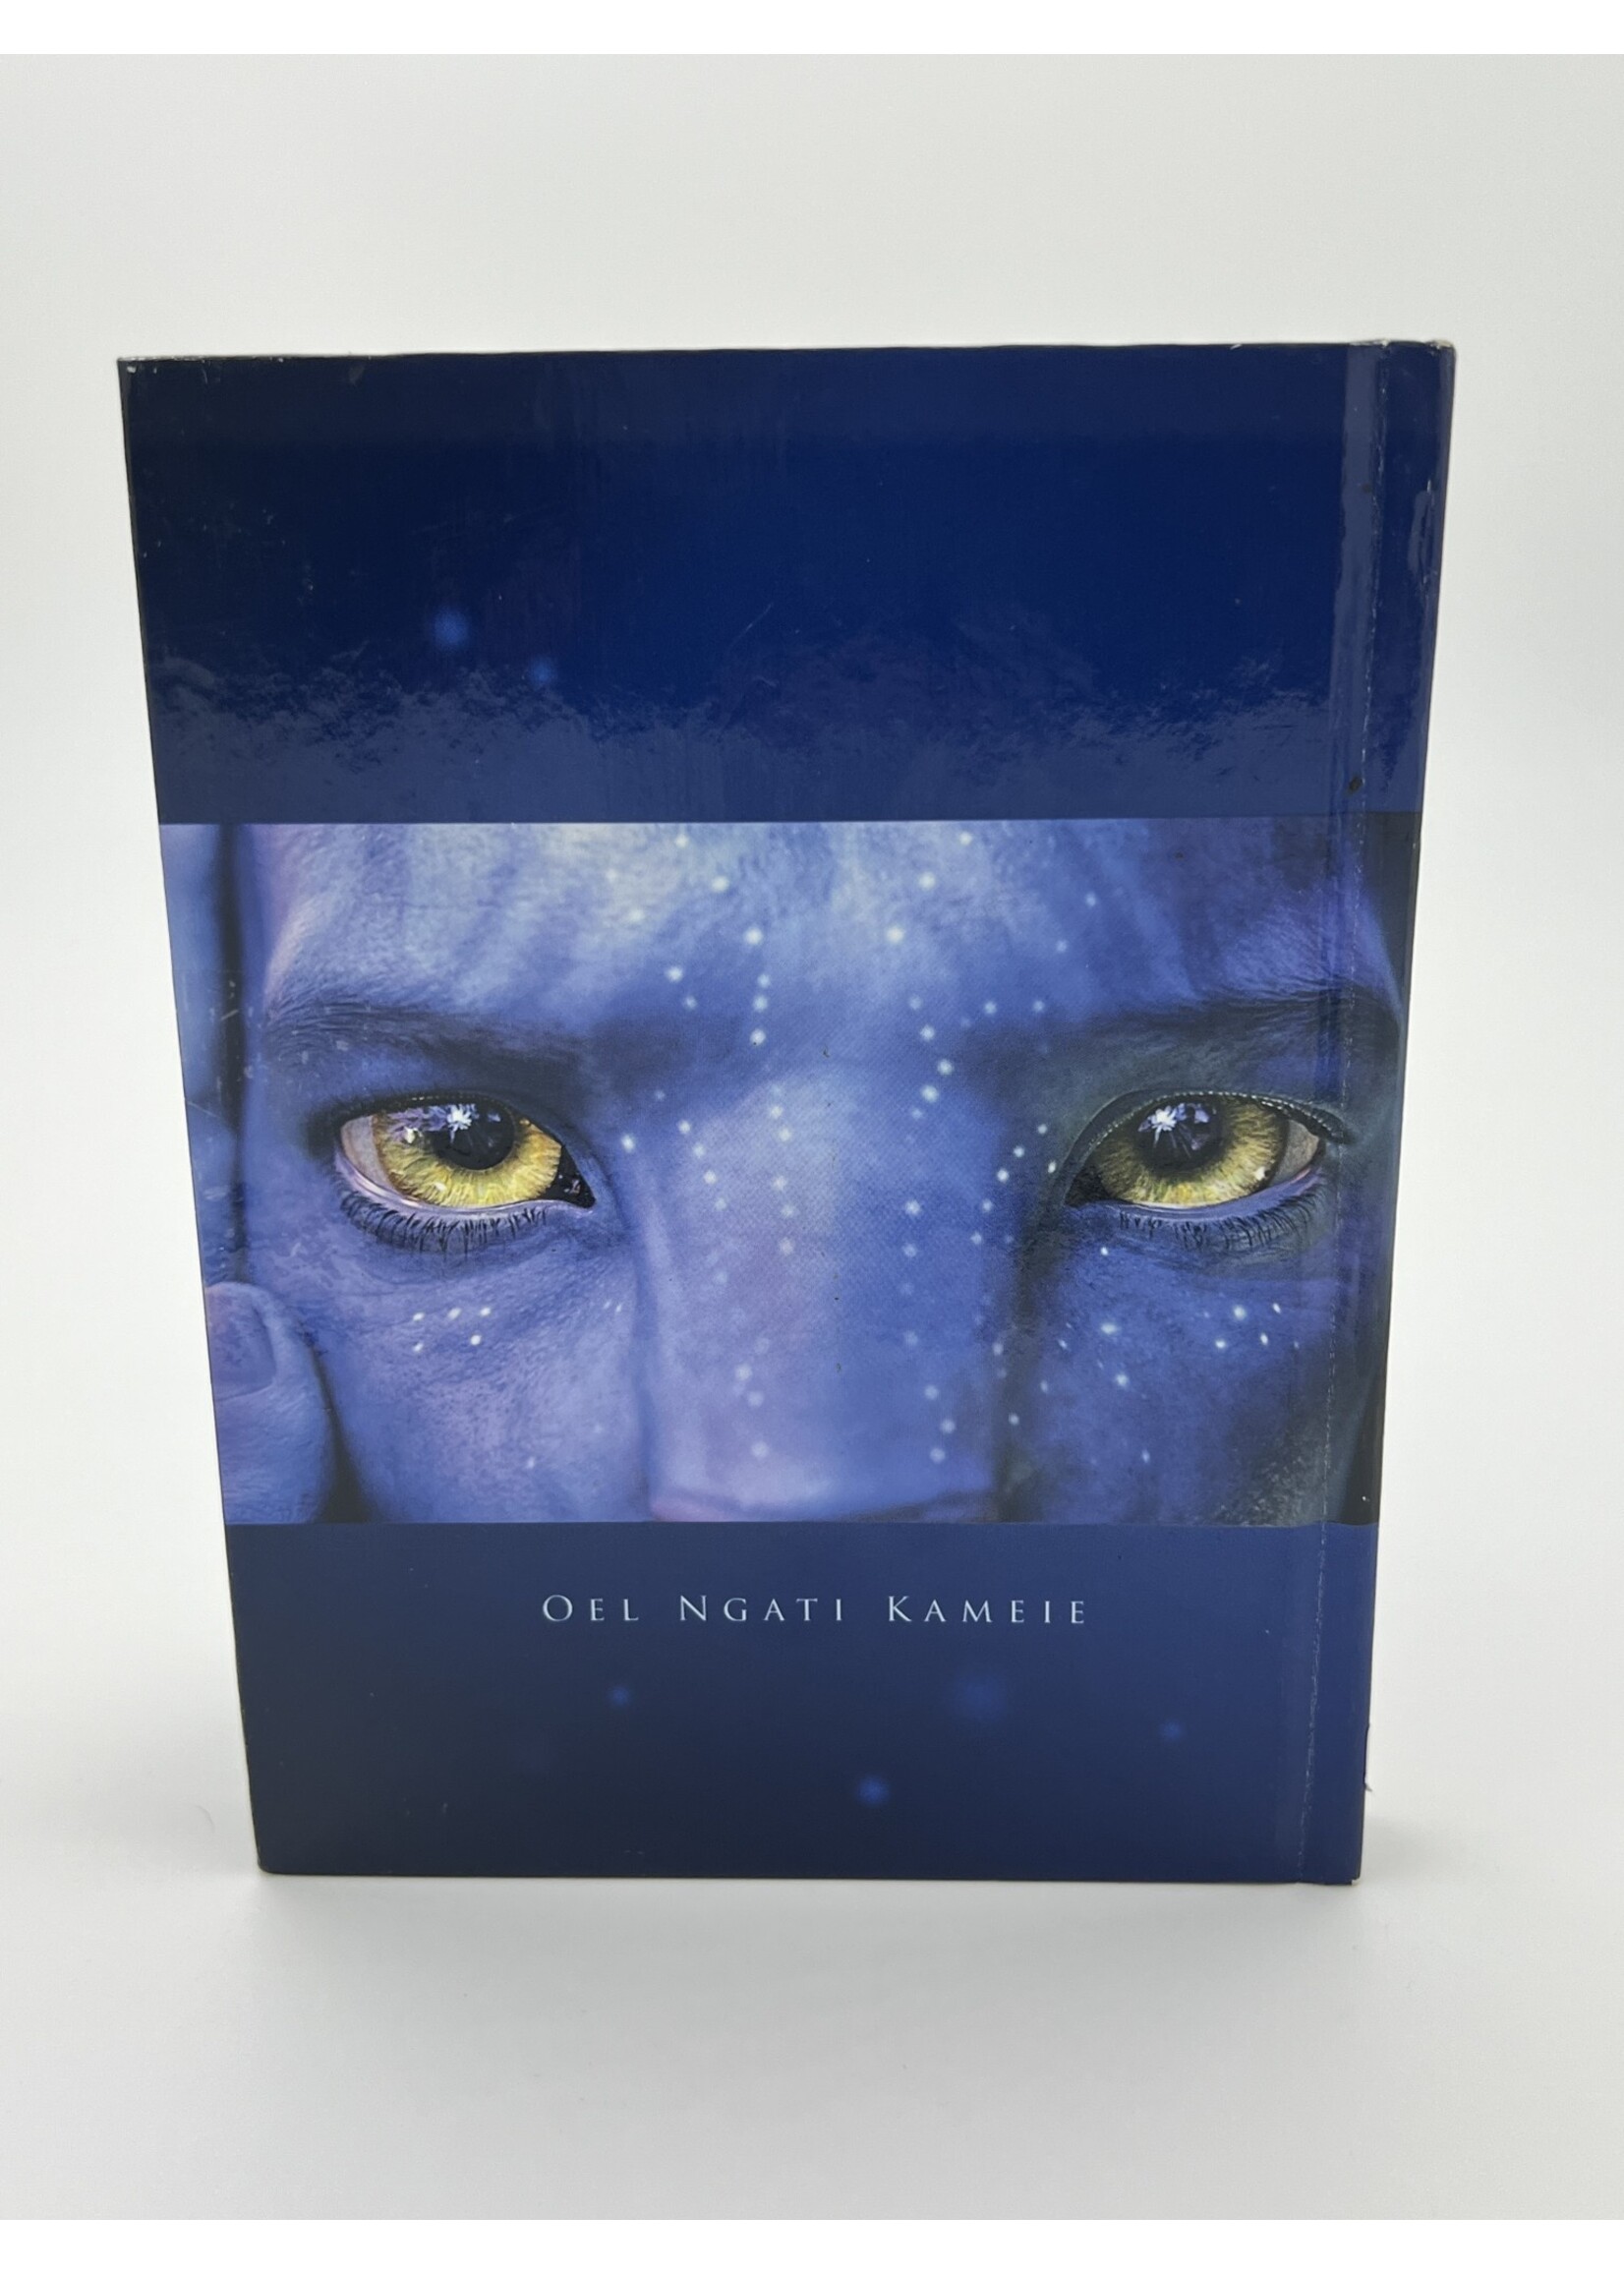 Bluray   Avatar Extended Collectors Edition Bluray